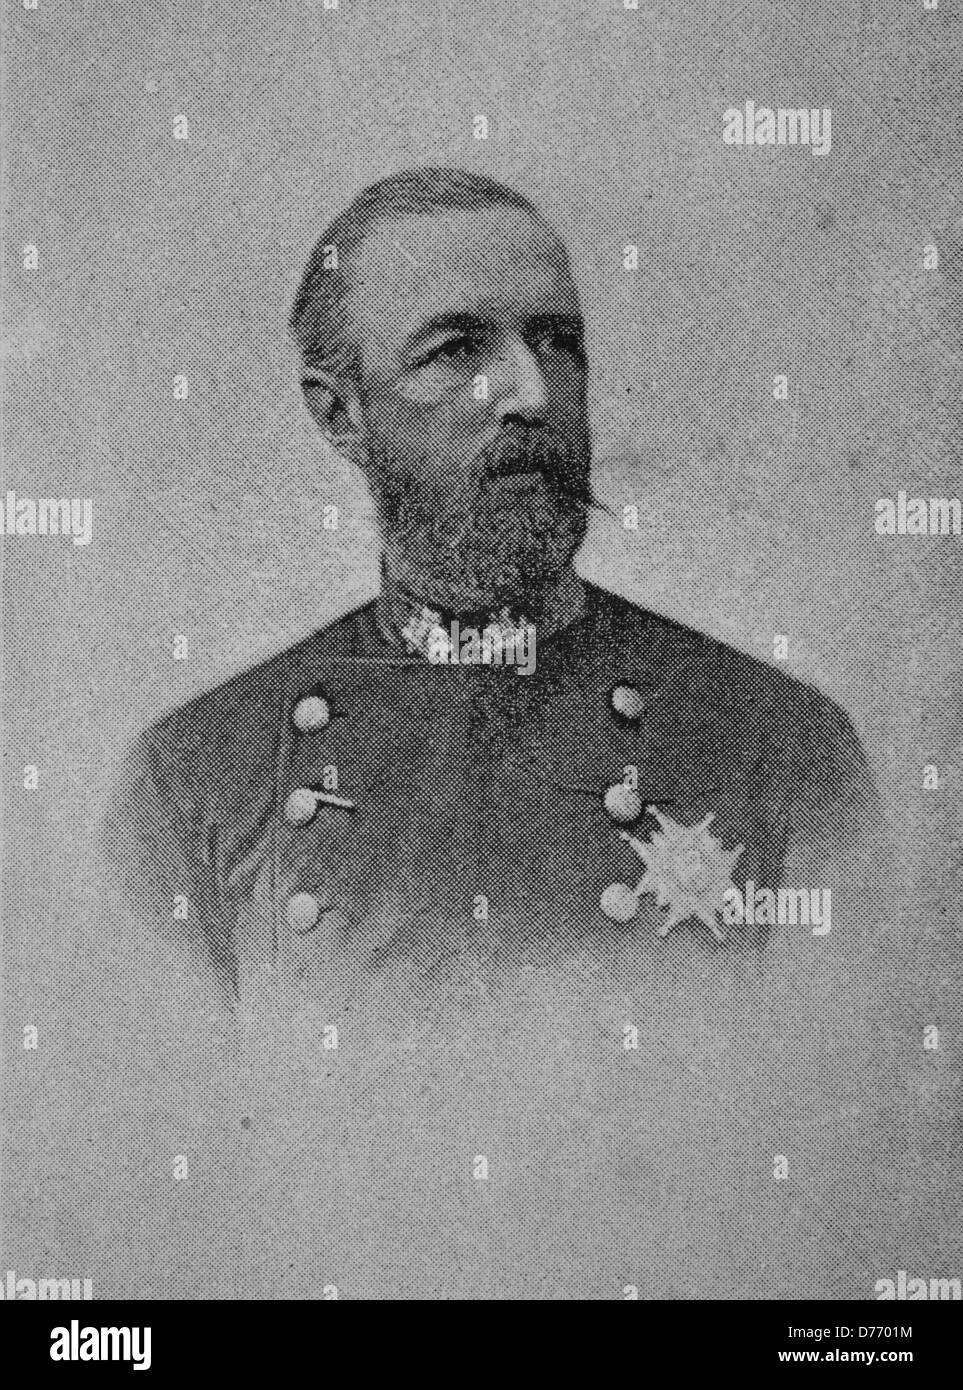 Oscar II, Oscar Frederick Bernadotte, 1829 - 1907, King of Sweden and Norway, woodcut from 1880 Stock Photo